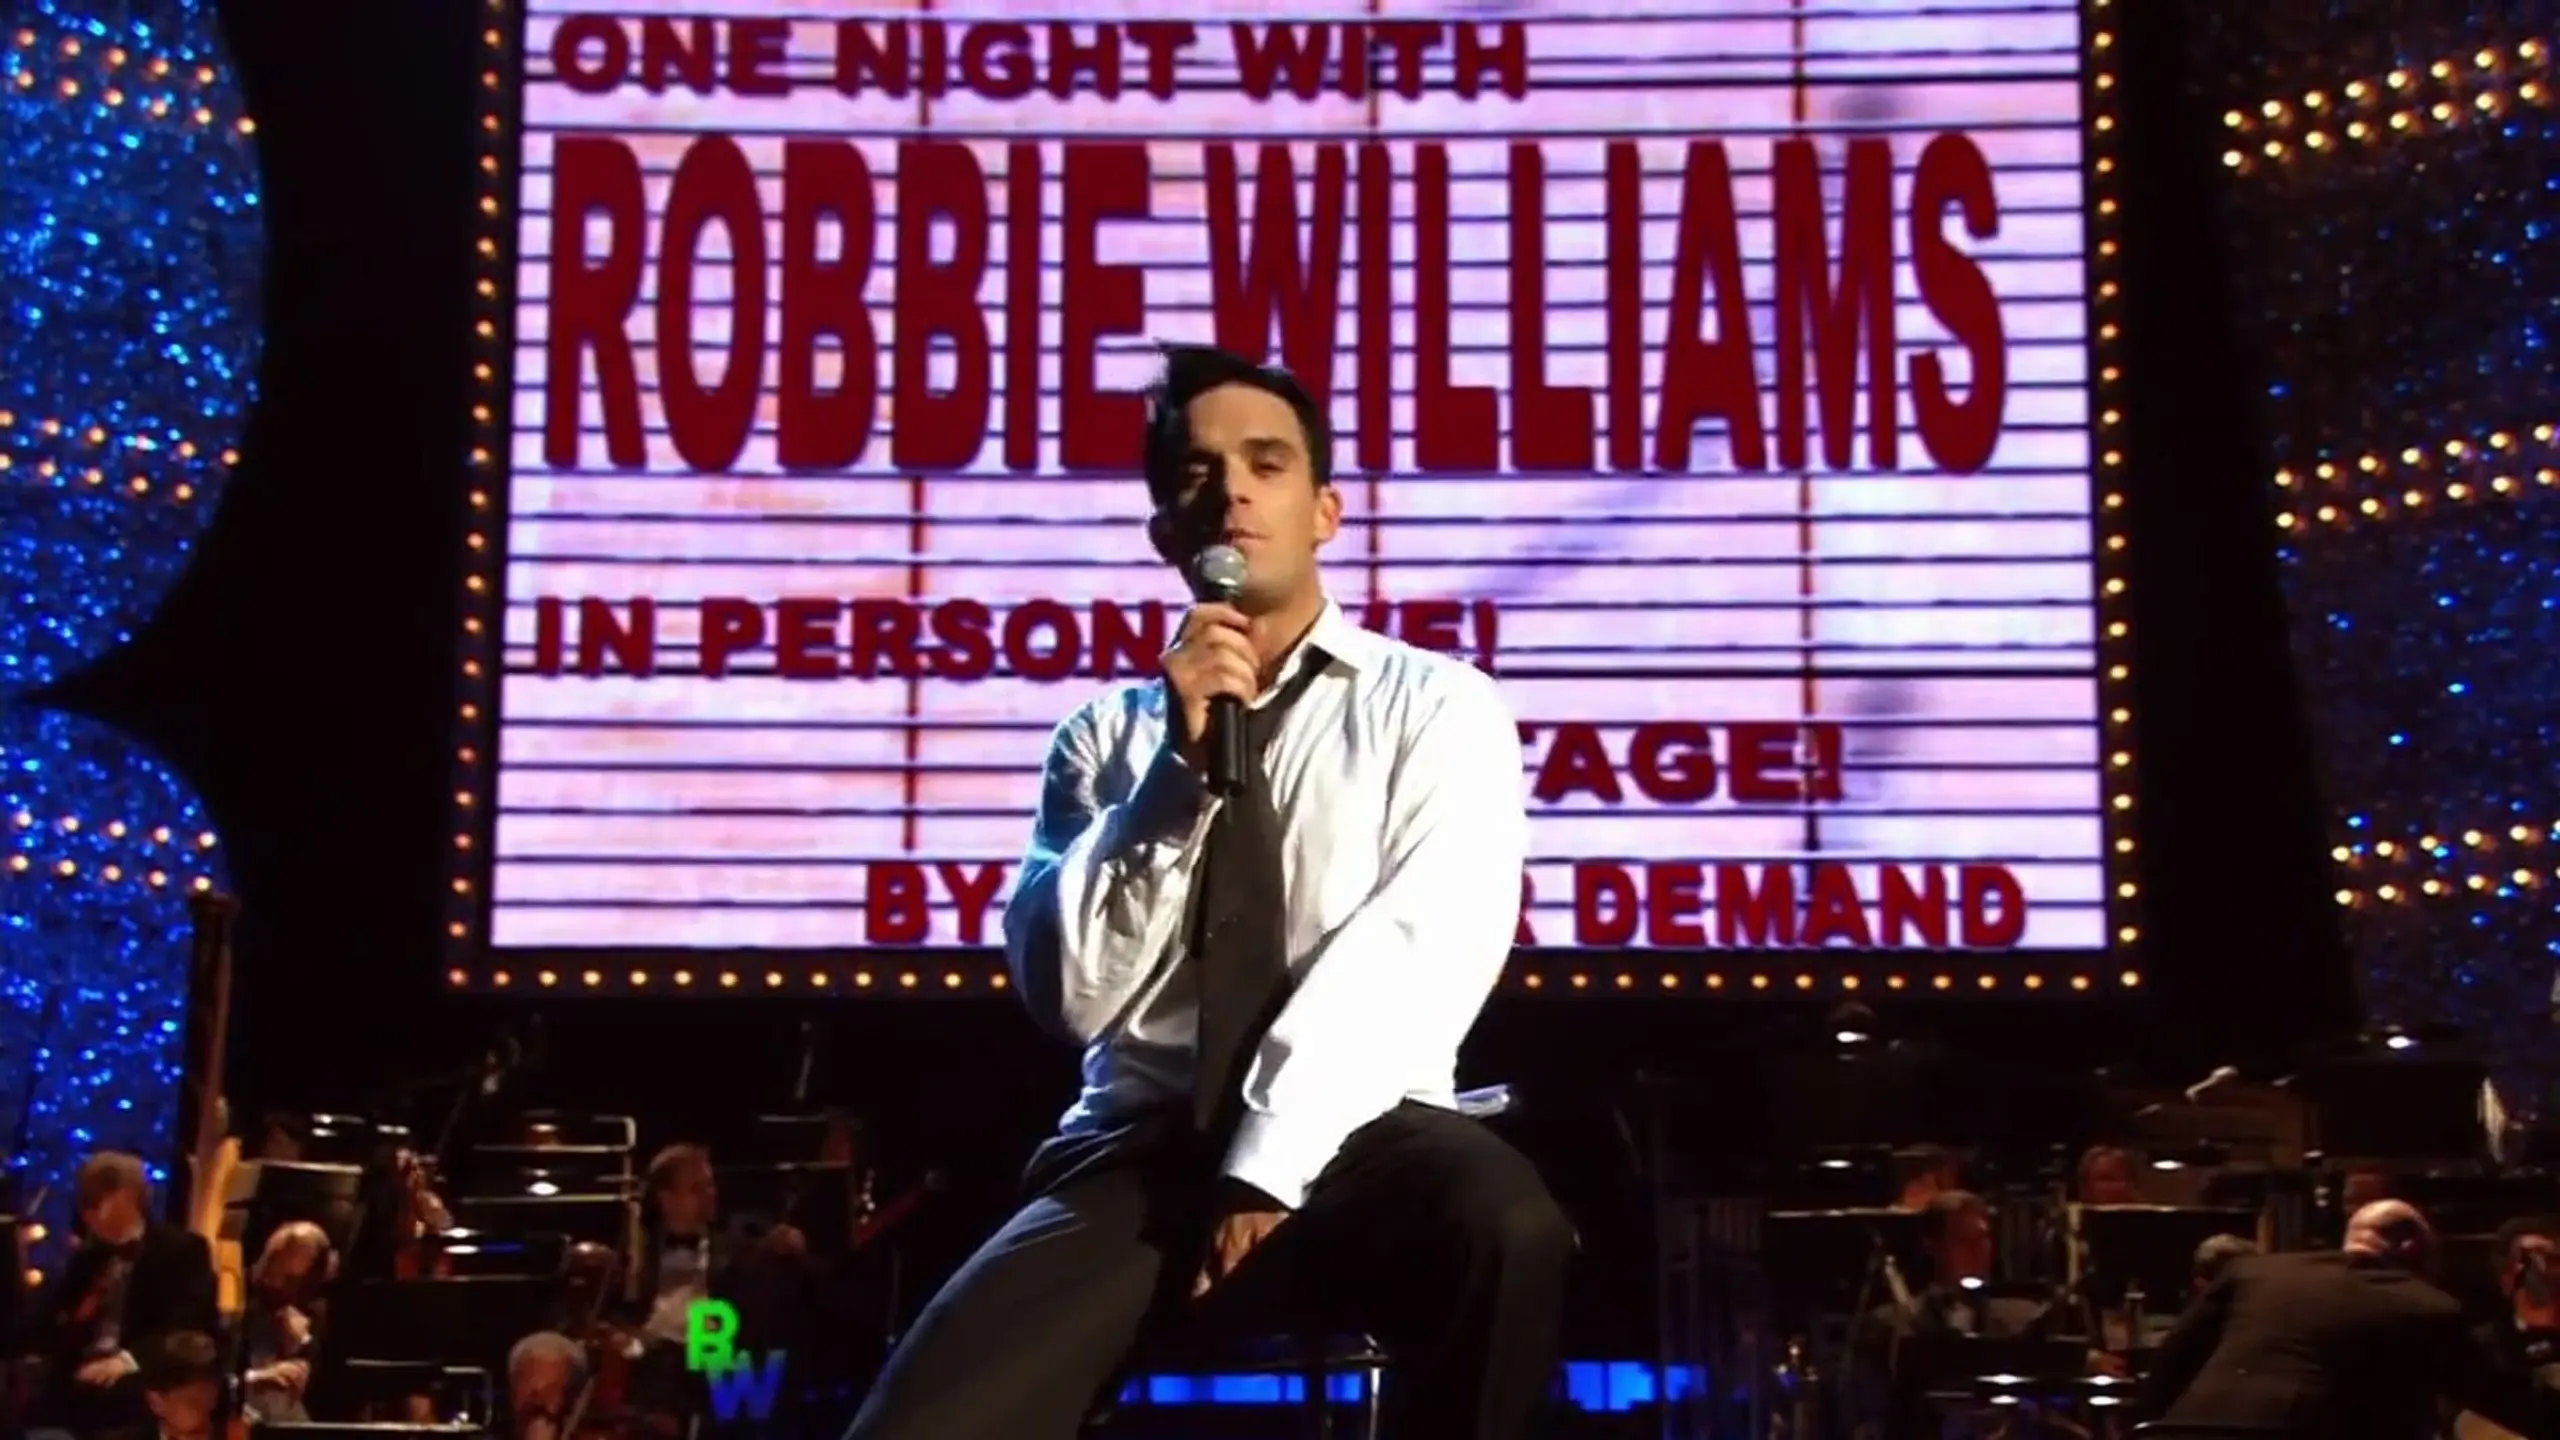 Robbie Williams: Live at the Albert